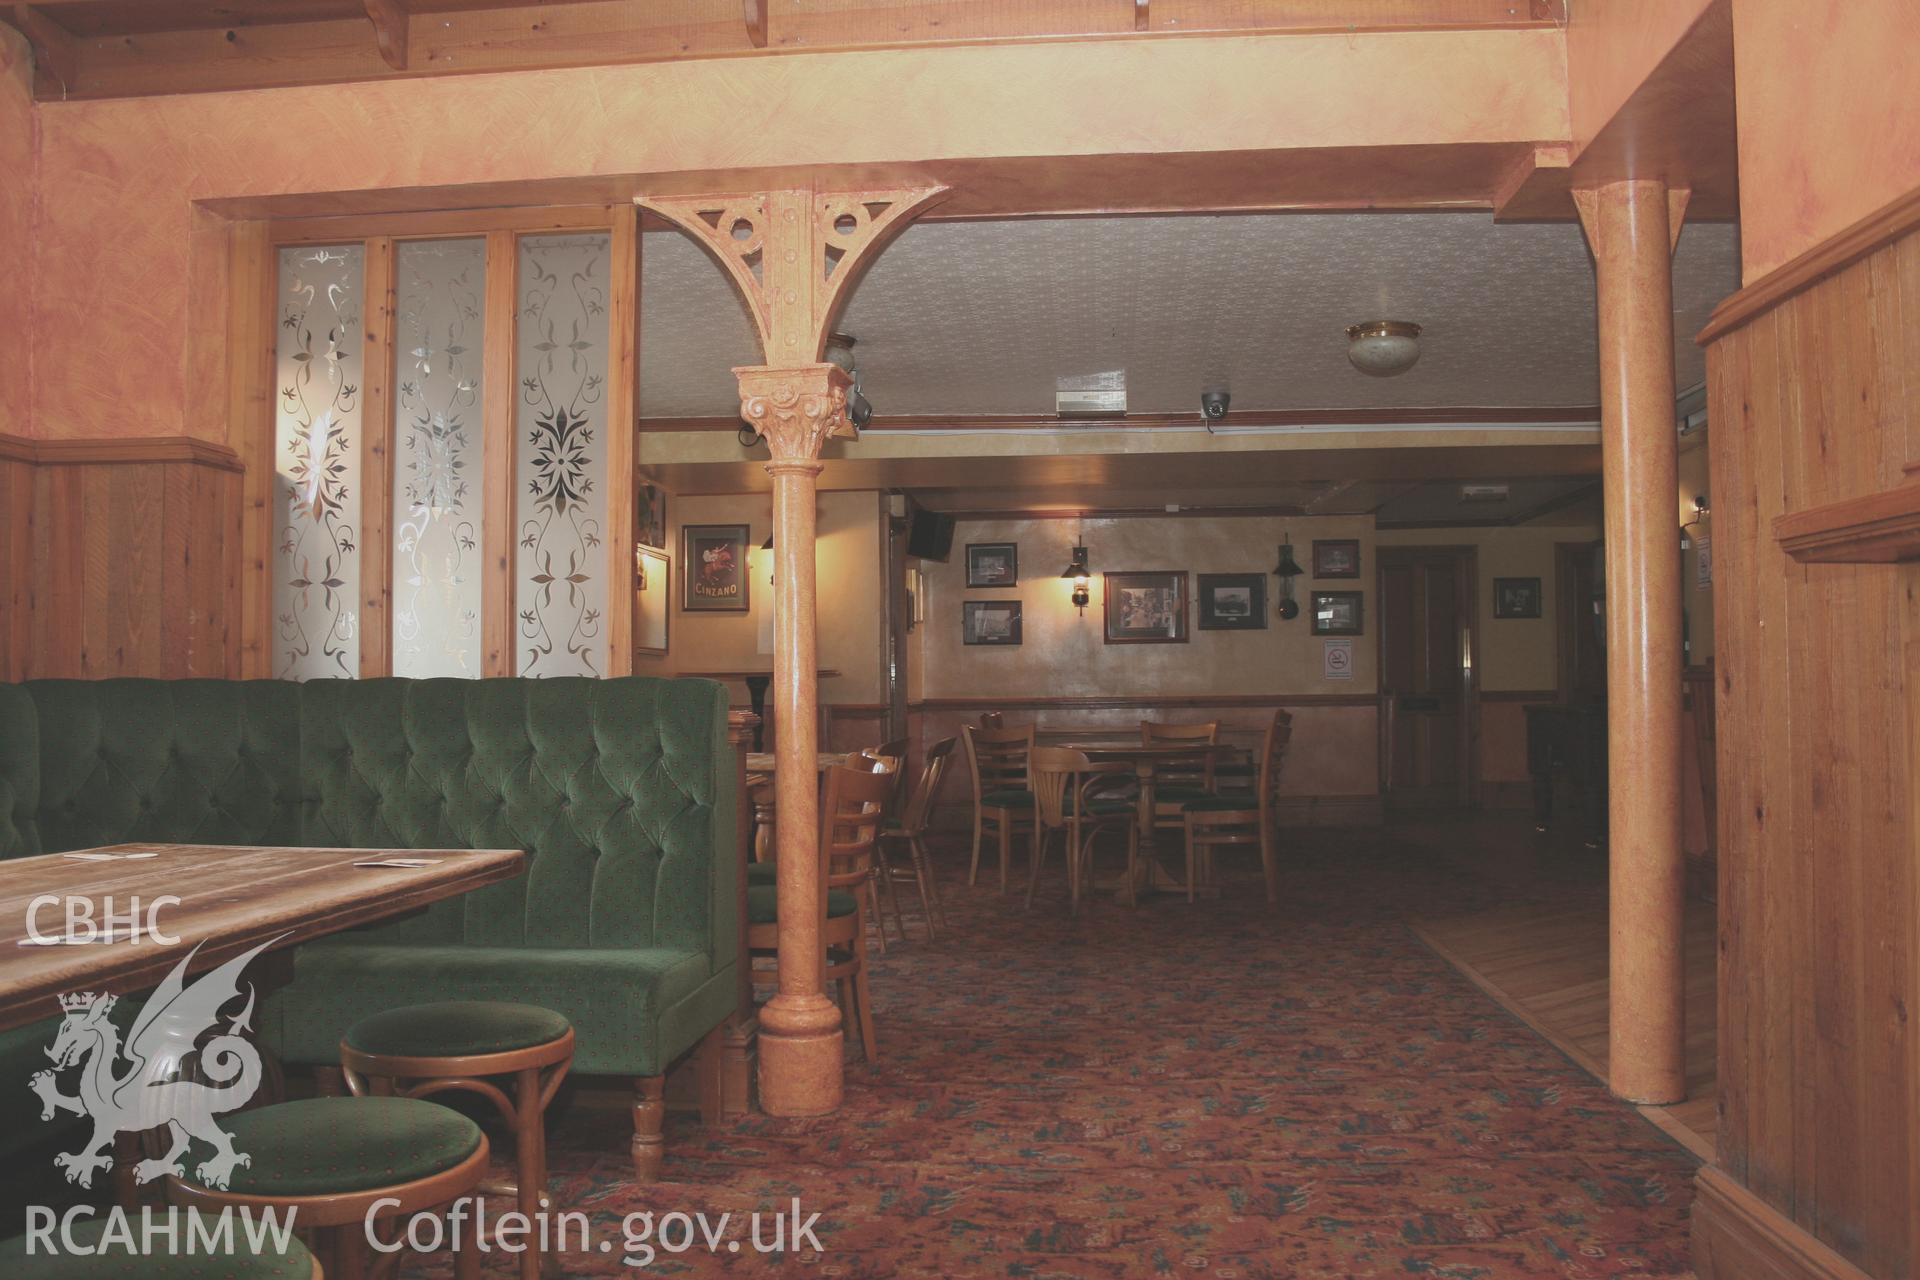 Turf Hotel, Mold Road, Wrexham. Interior, Re-set gallery column from front-room, left.